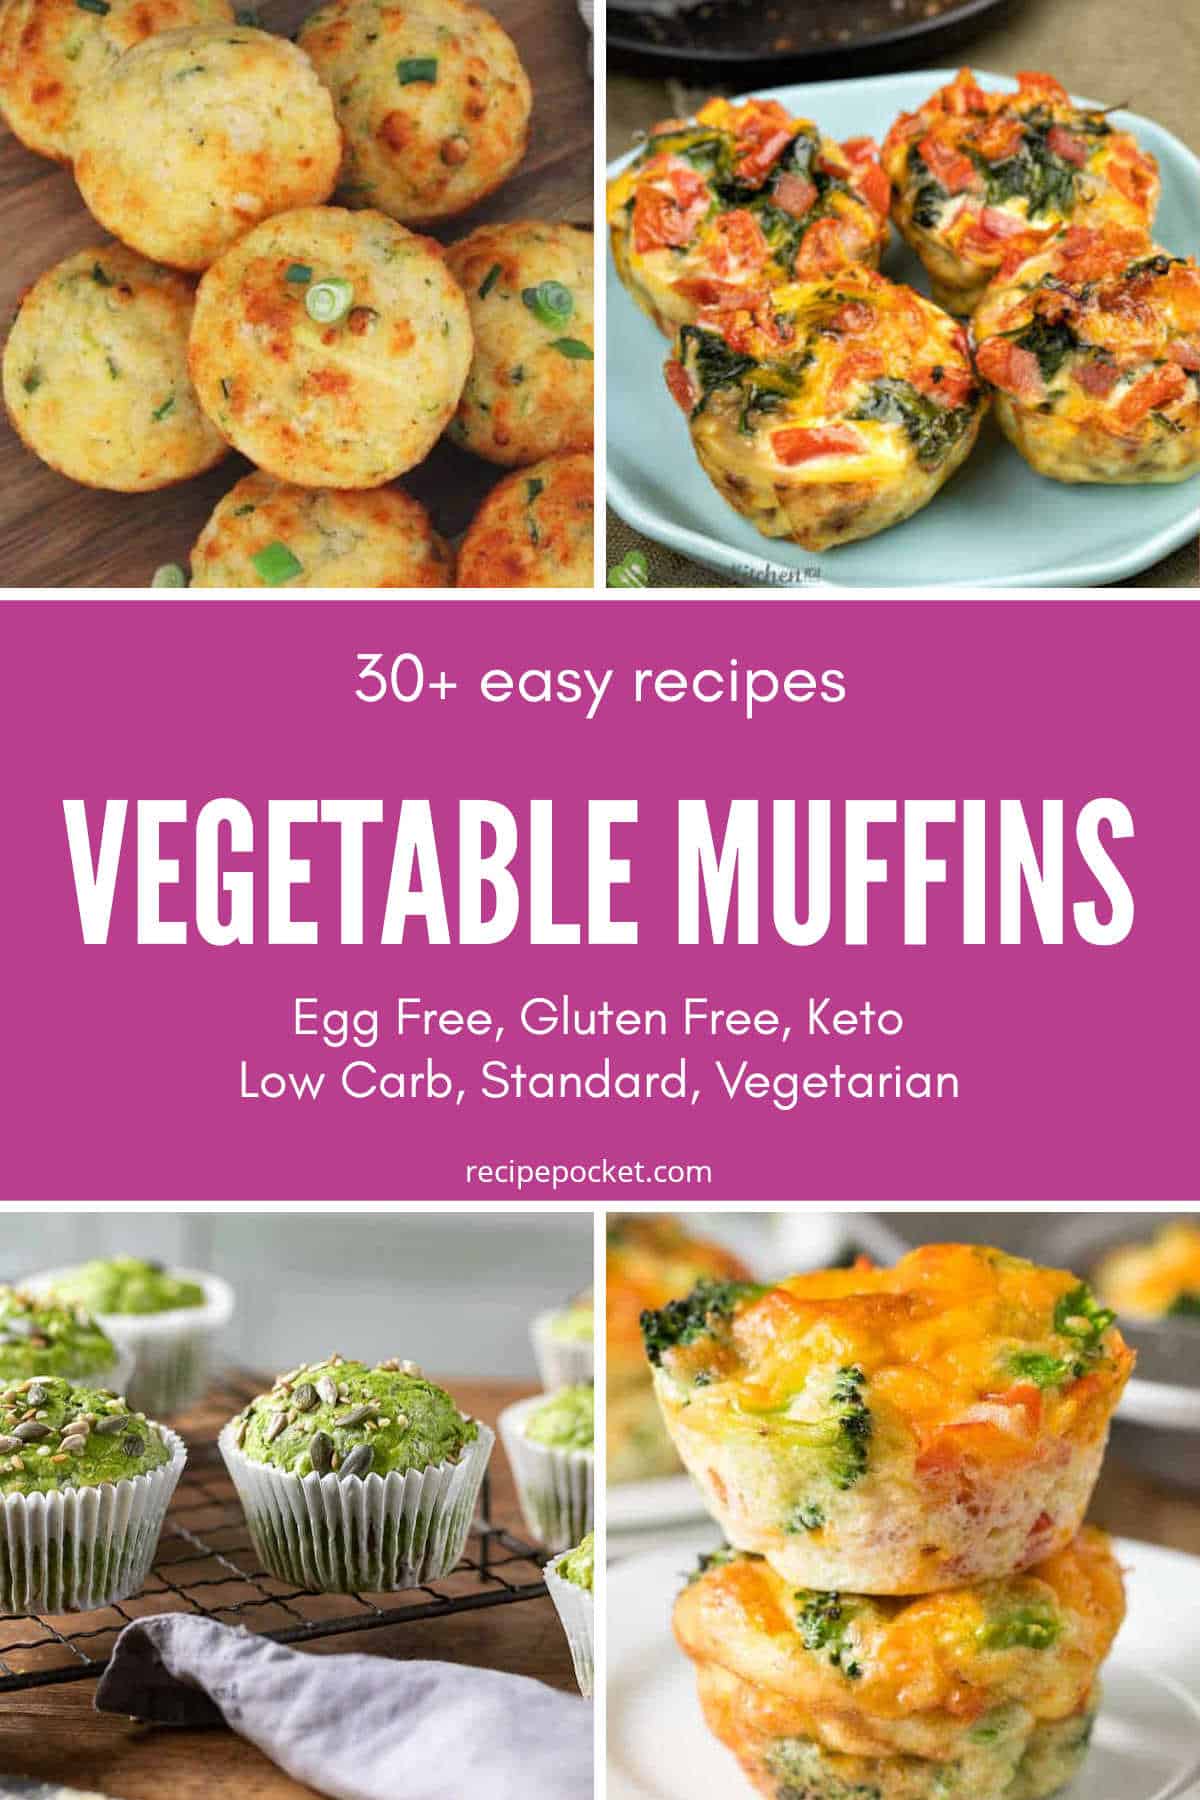 Featured image for veggie muffins round up post. It shows four muffin images.